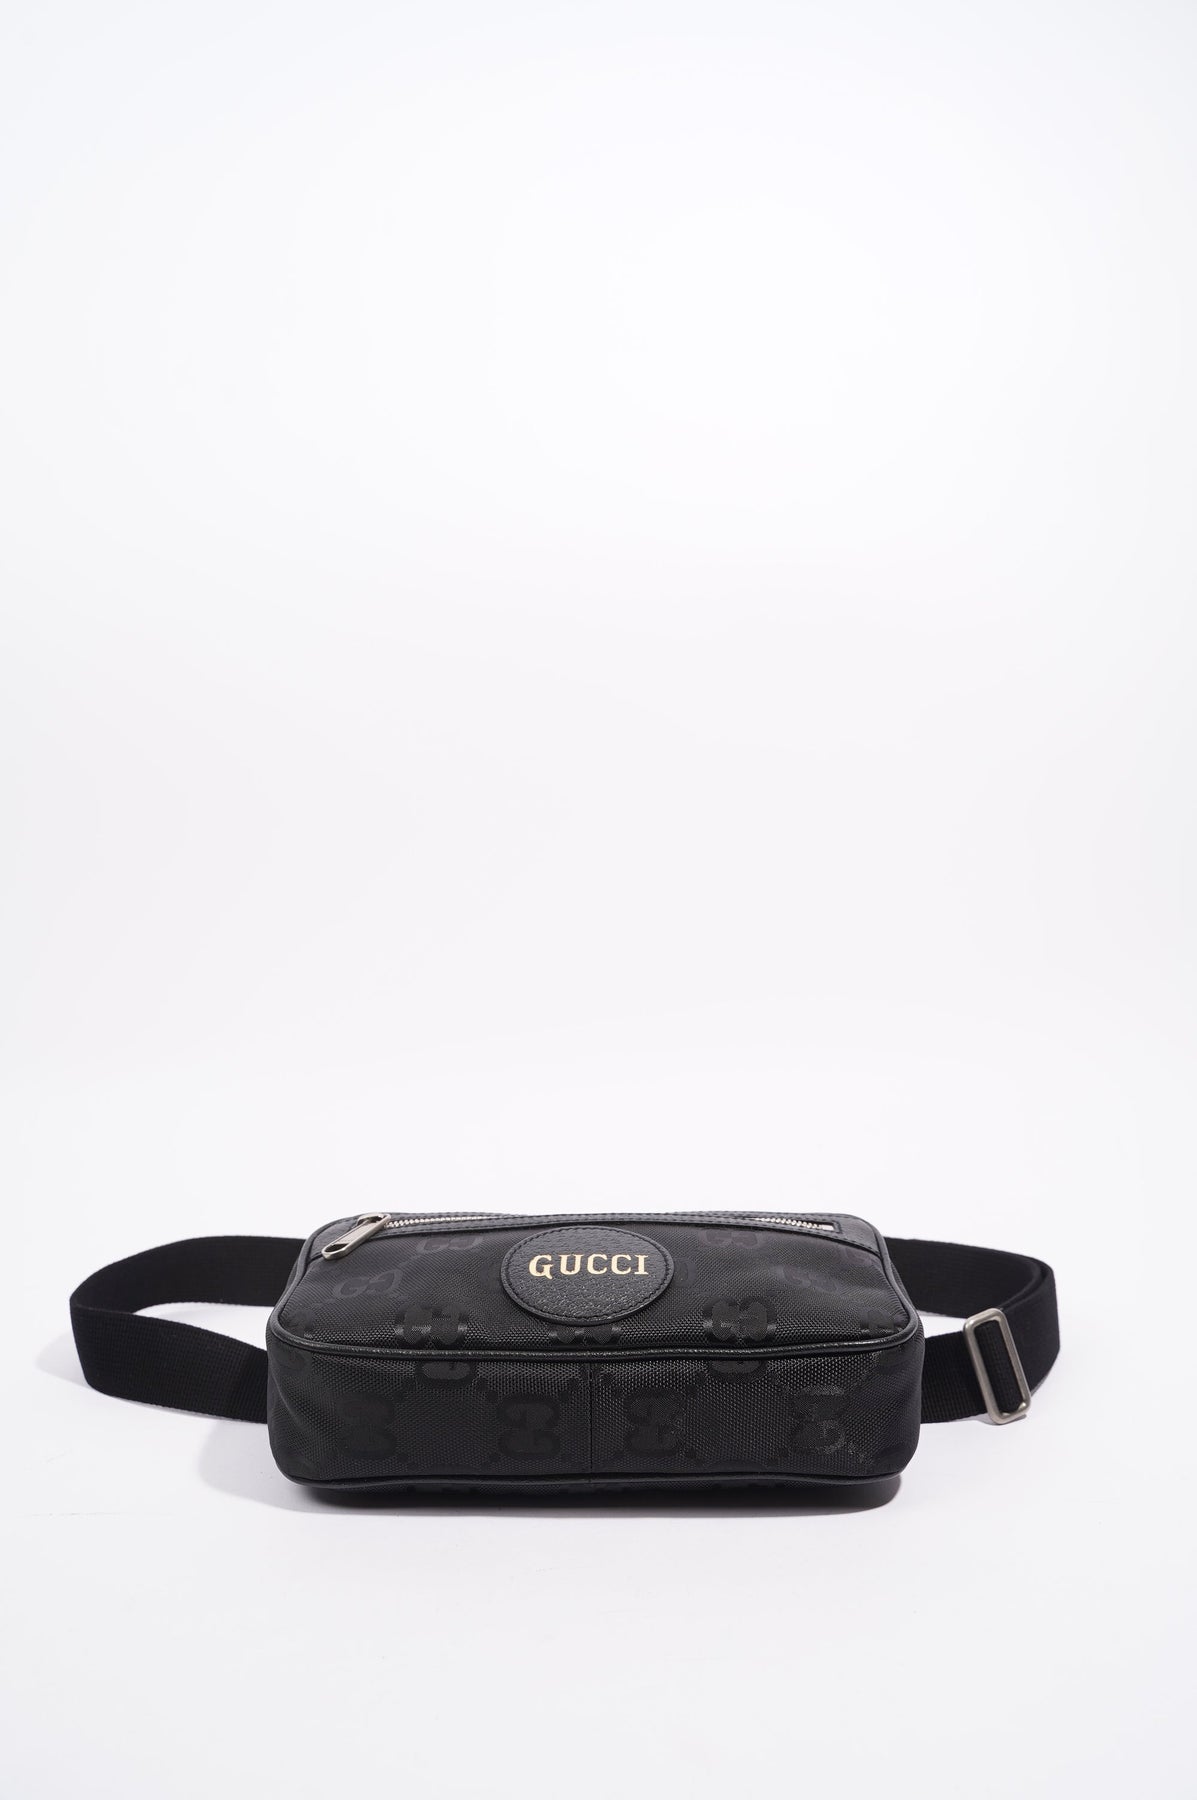 Pre-Owned Gucci Off the Grid Belt Bag